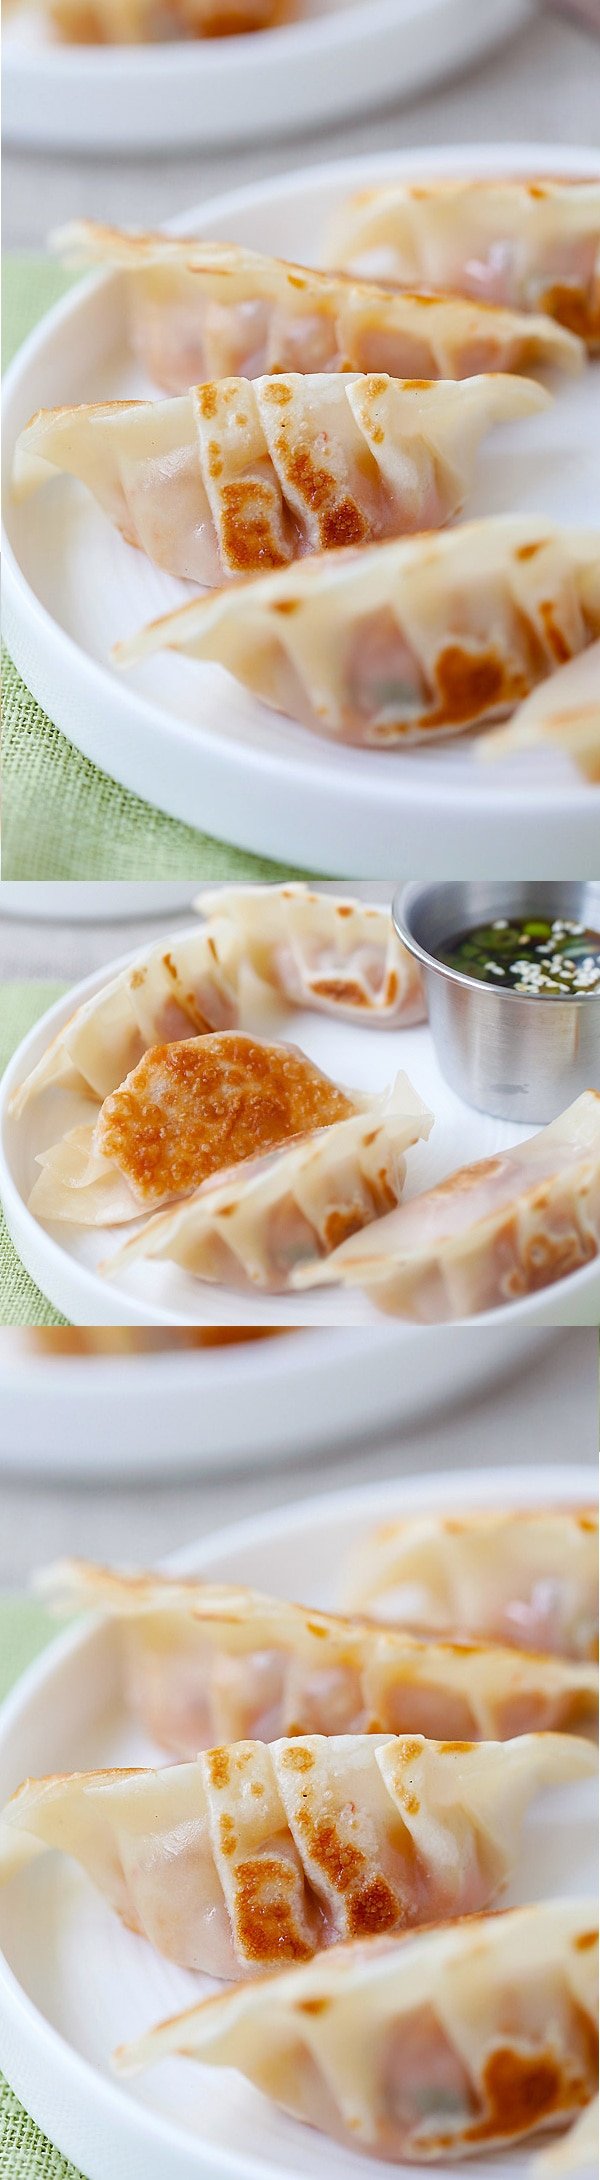 Pork and Shiitake Gyoza - healthy and delicious Japanese dumplings that you can make at home with this super easy and fool proof recipe. | rasamalaysia.com